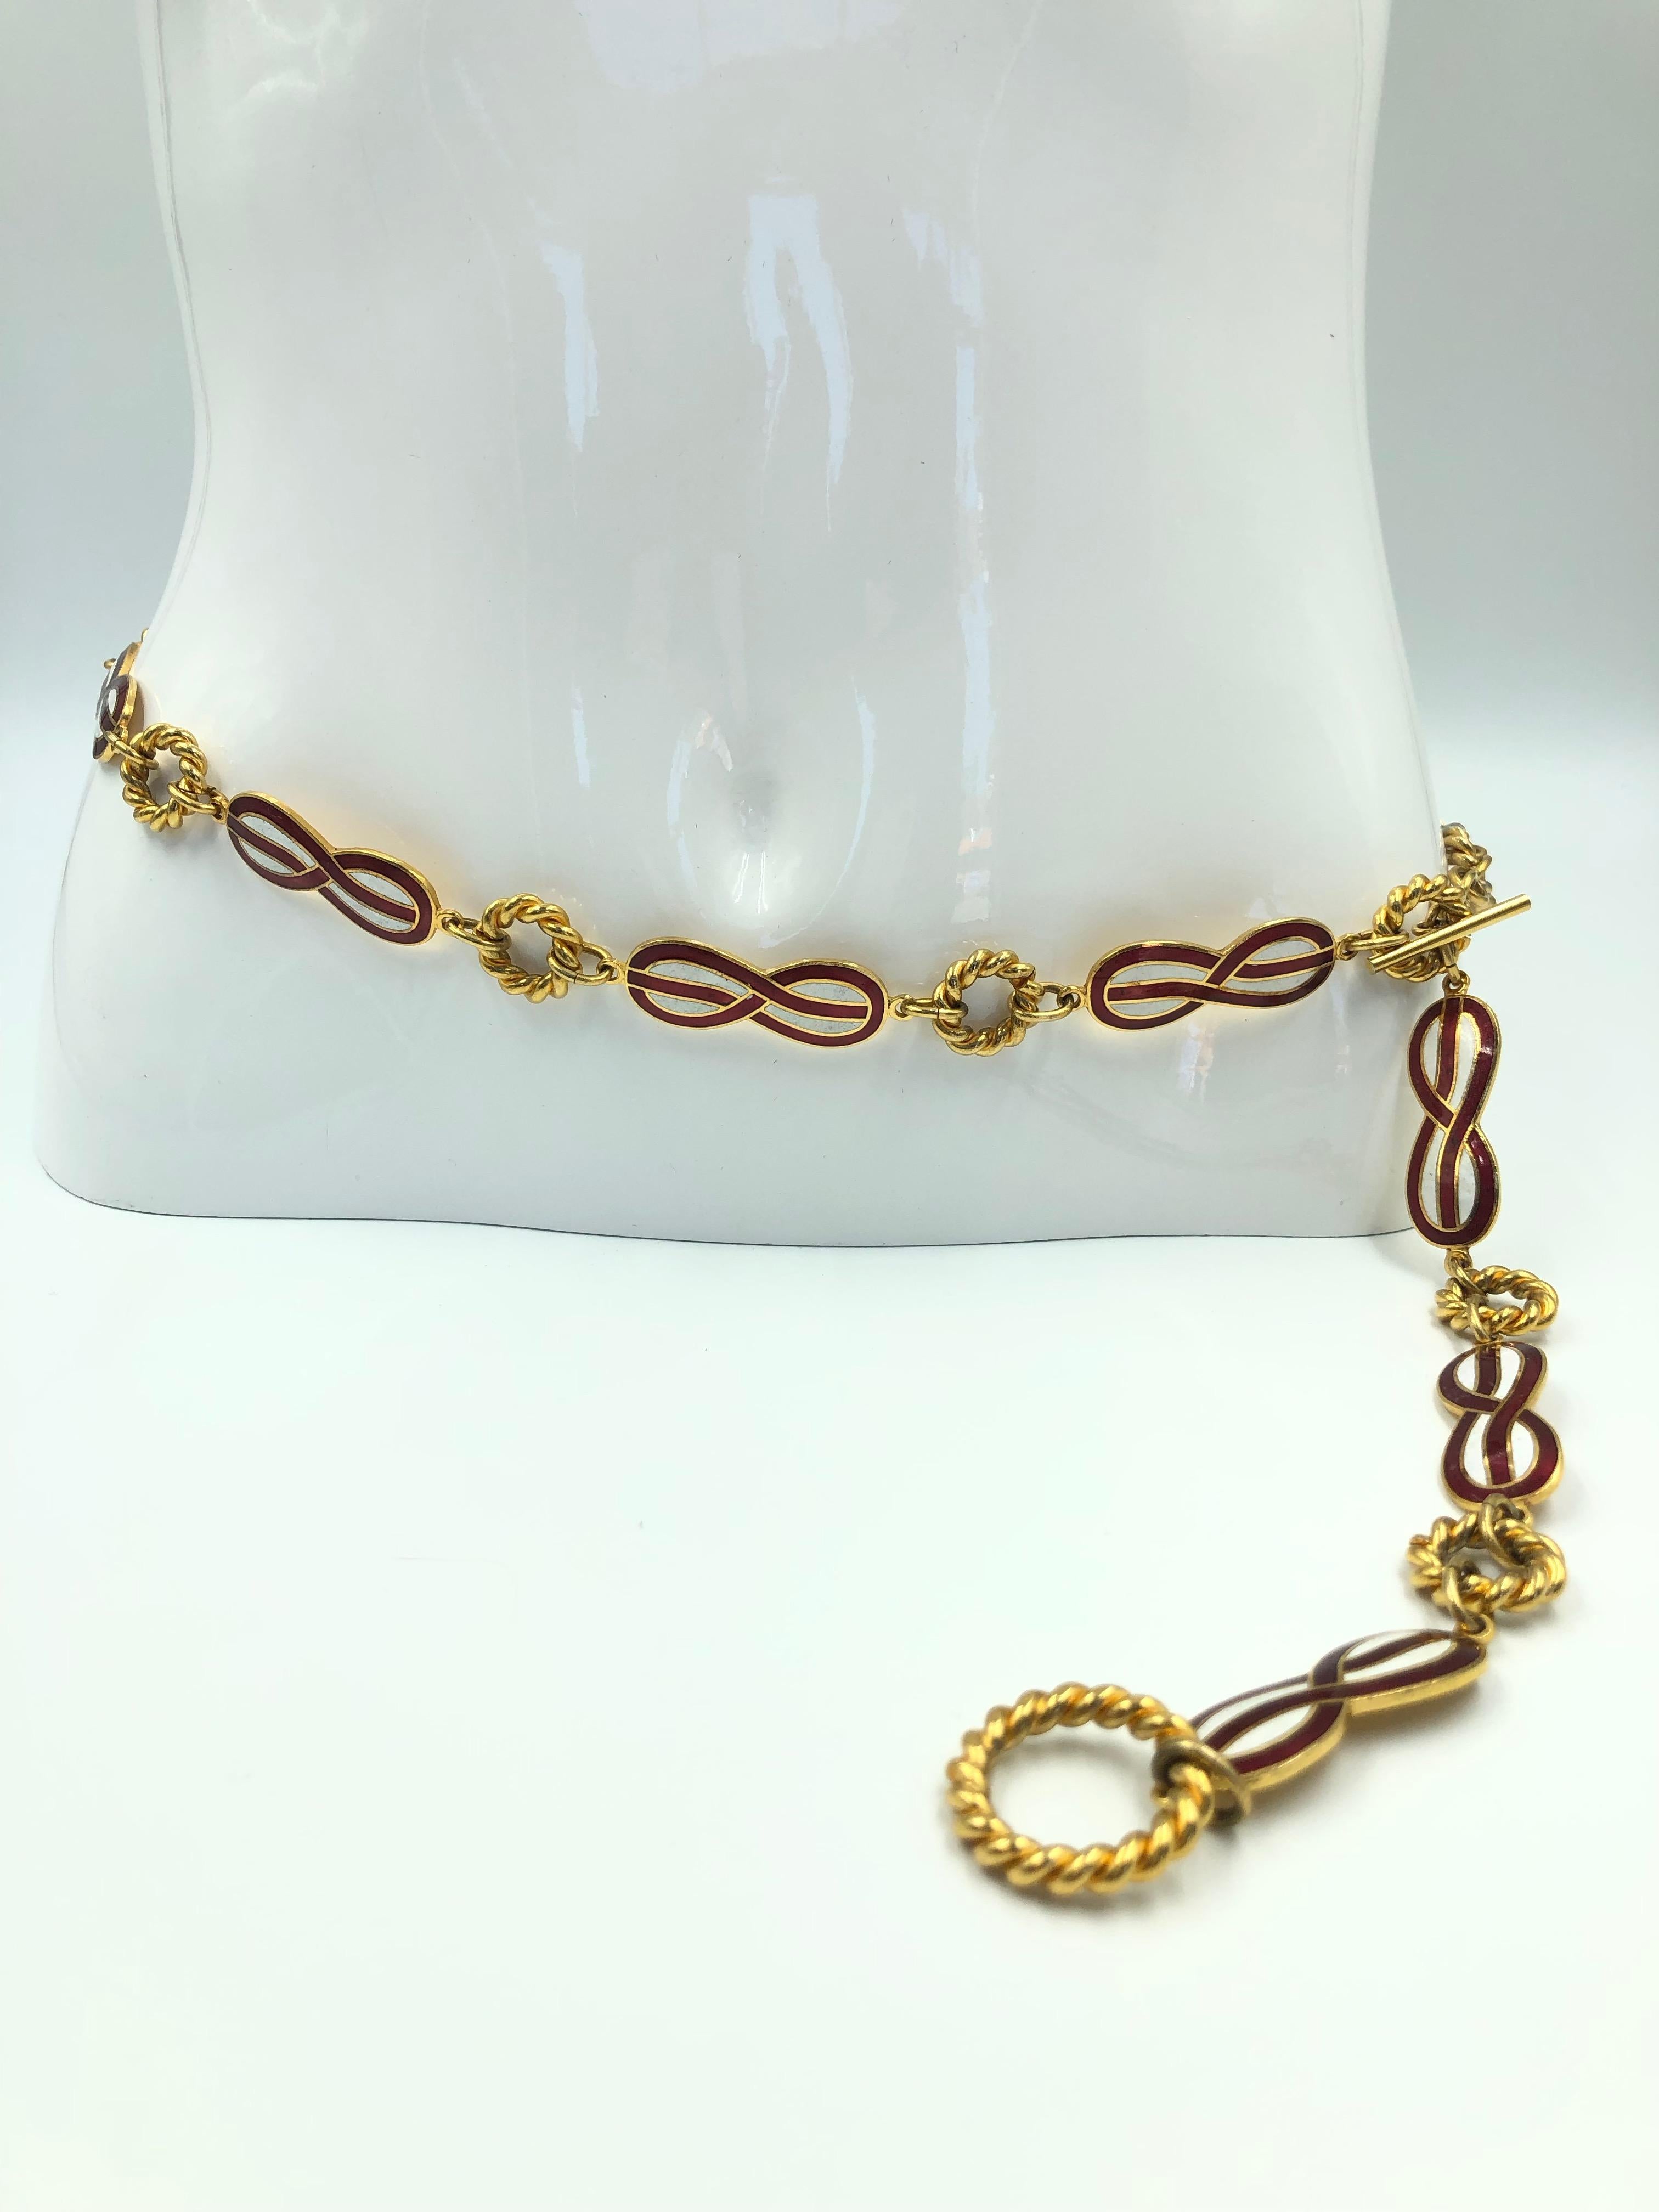 Gucci 1970's Infinity Symbol Red & White Enamel and Gold Tone Chain Belt

Length: 36